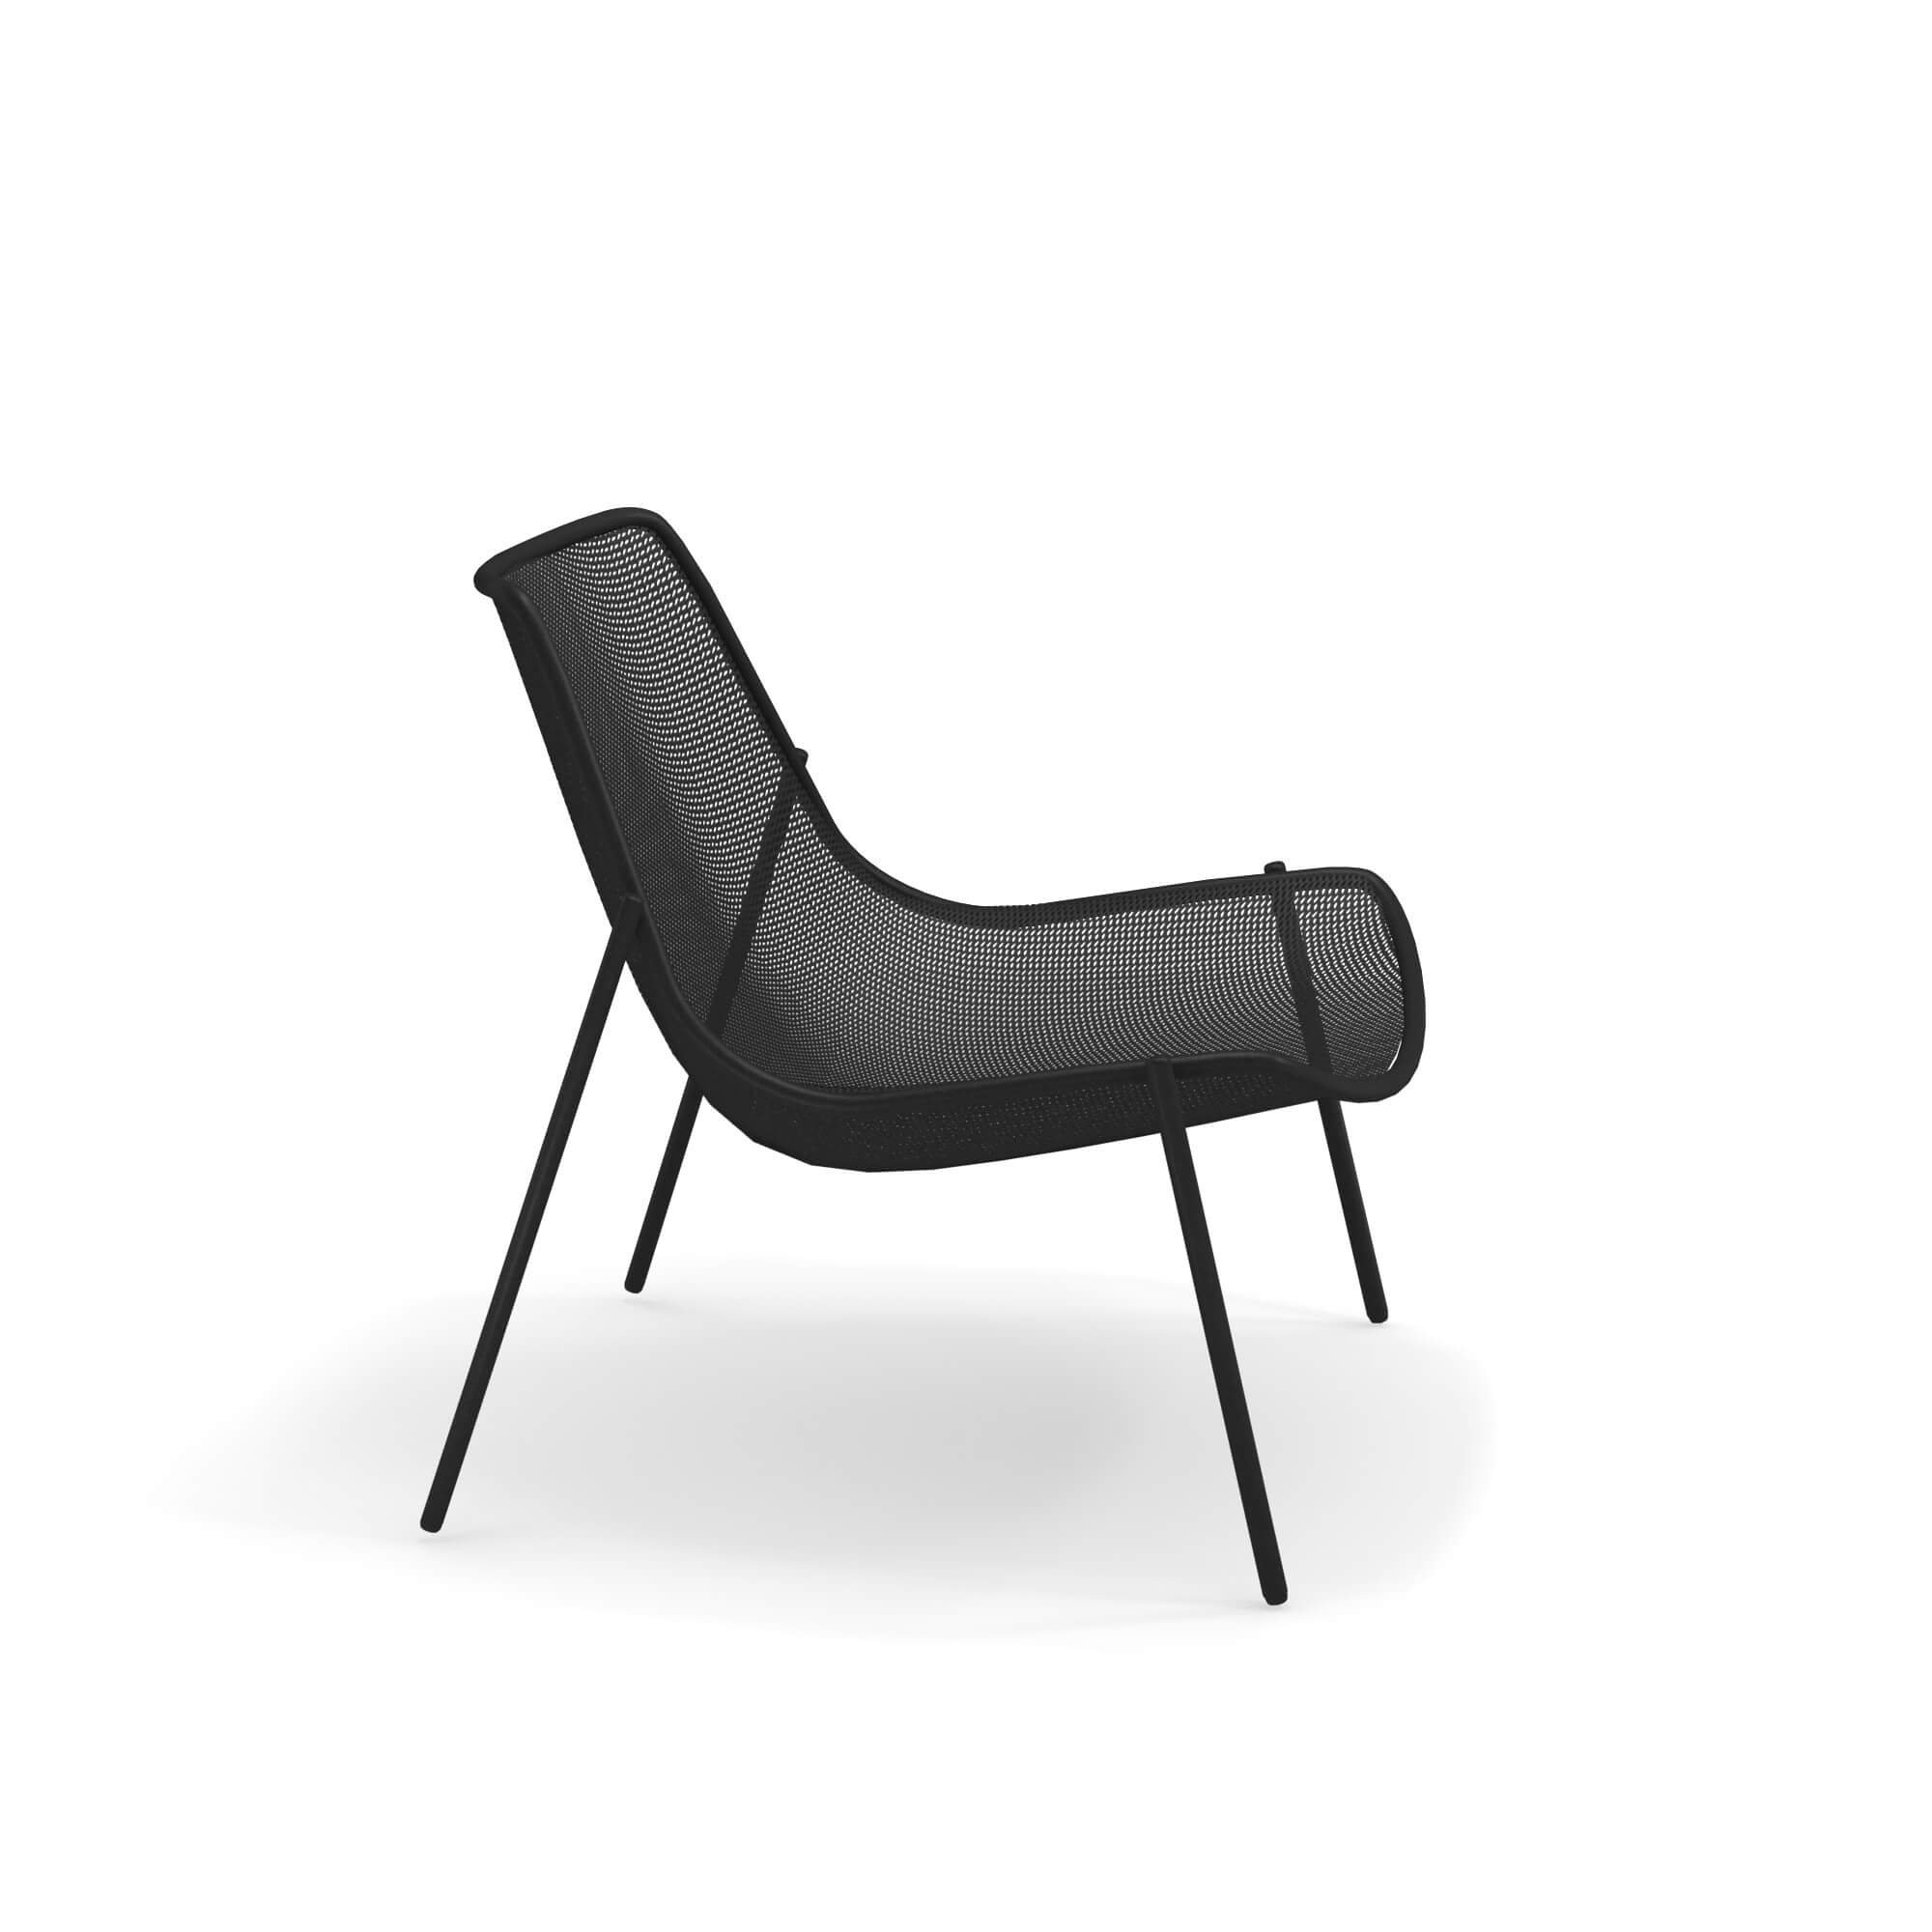 Round Lounge Chair from Emu, designed by Christophe Pillet